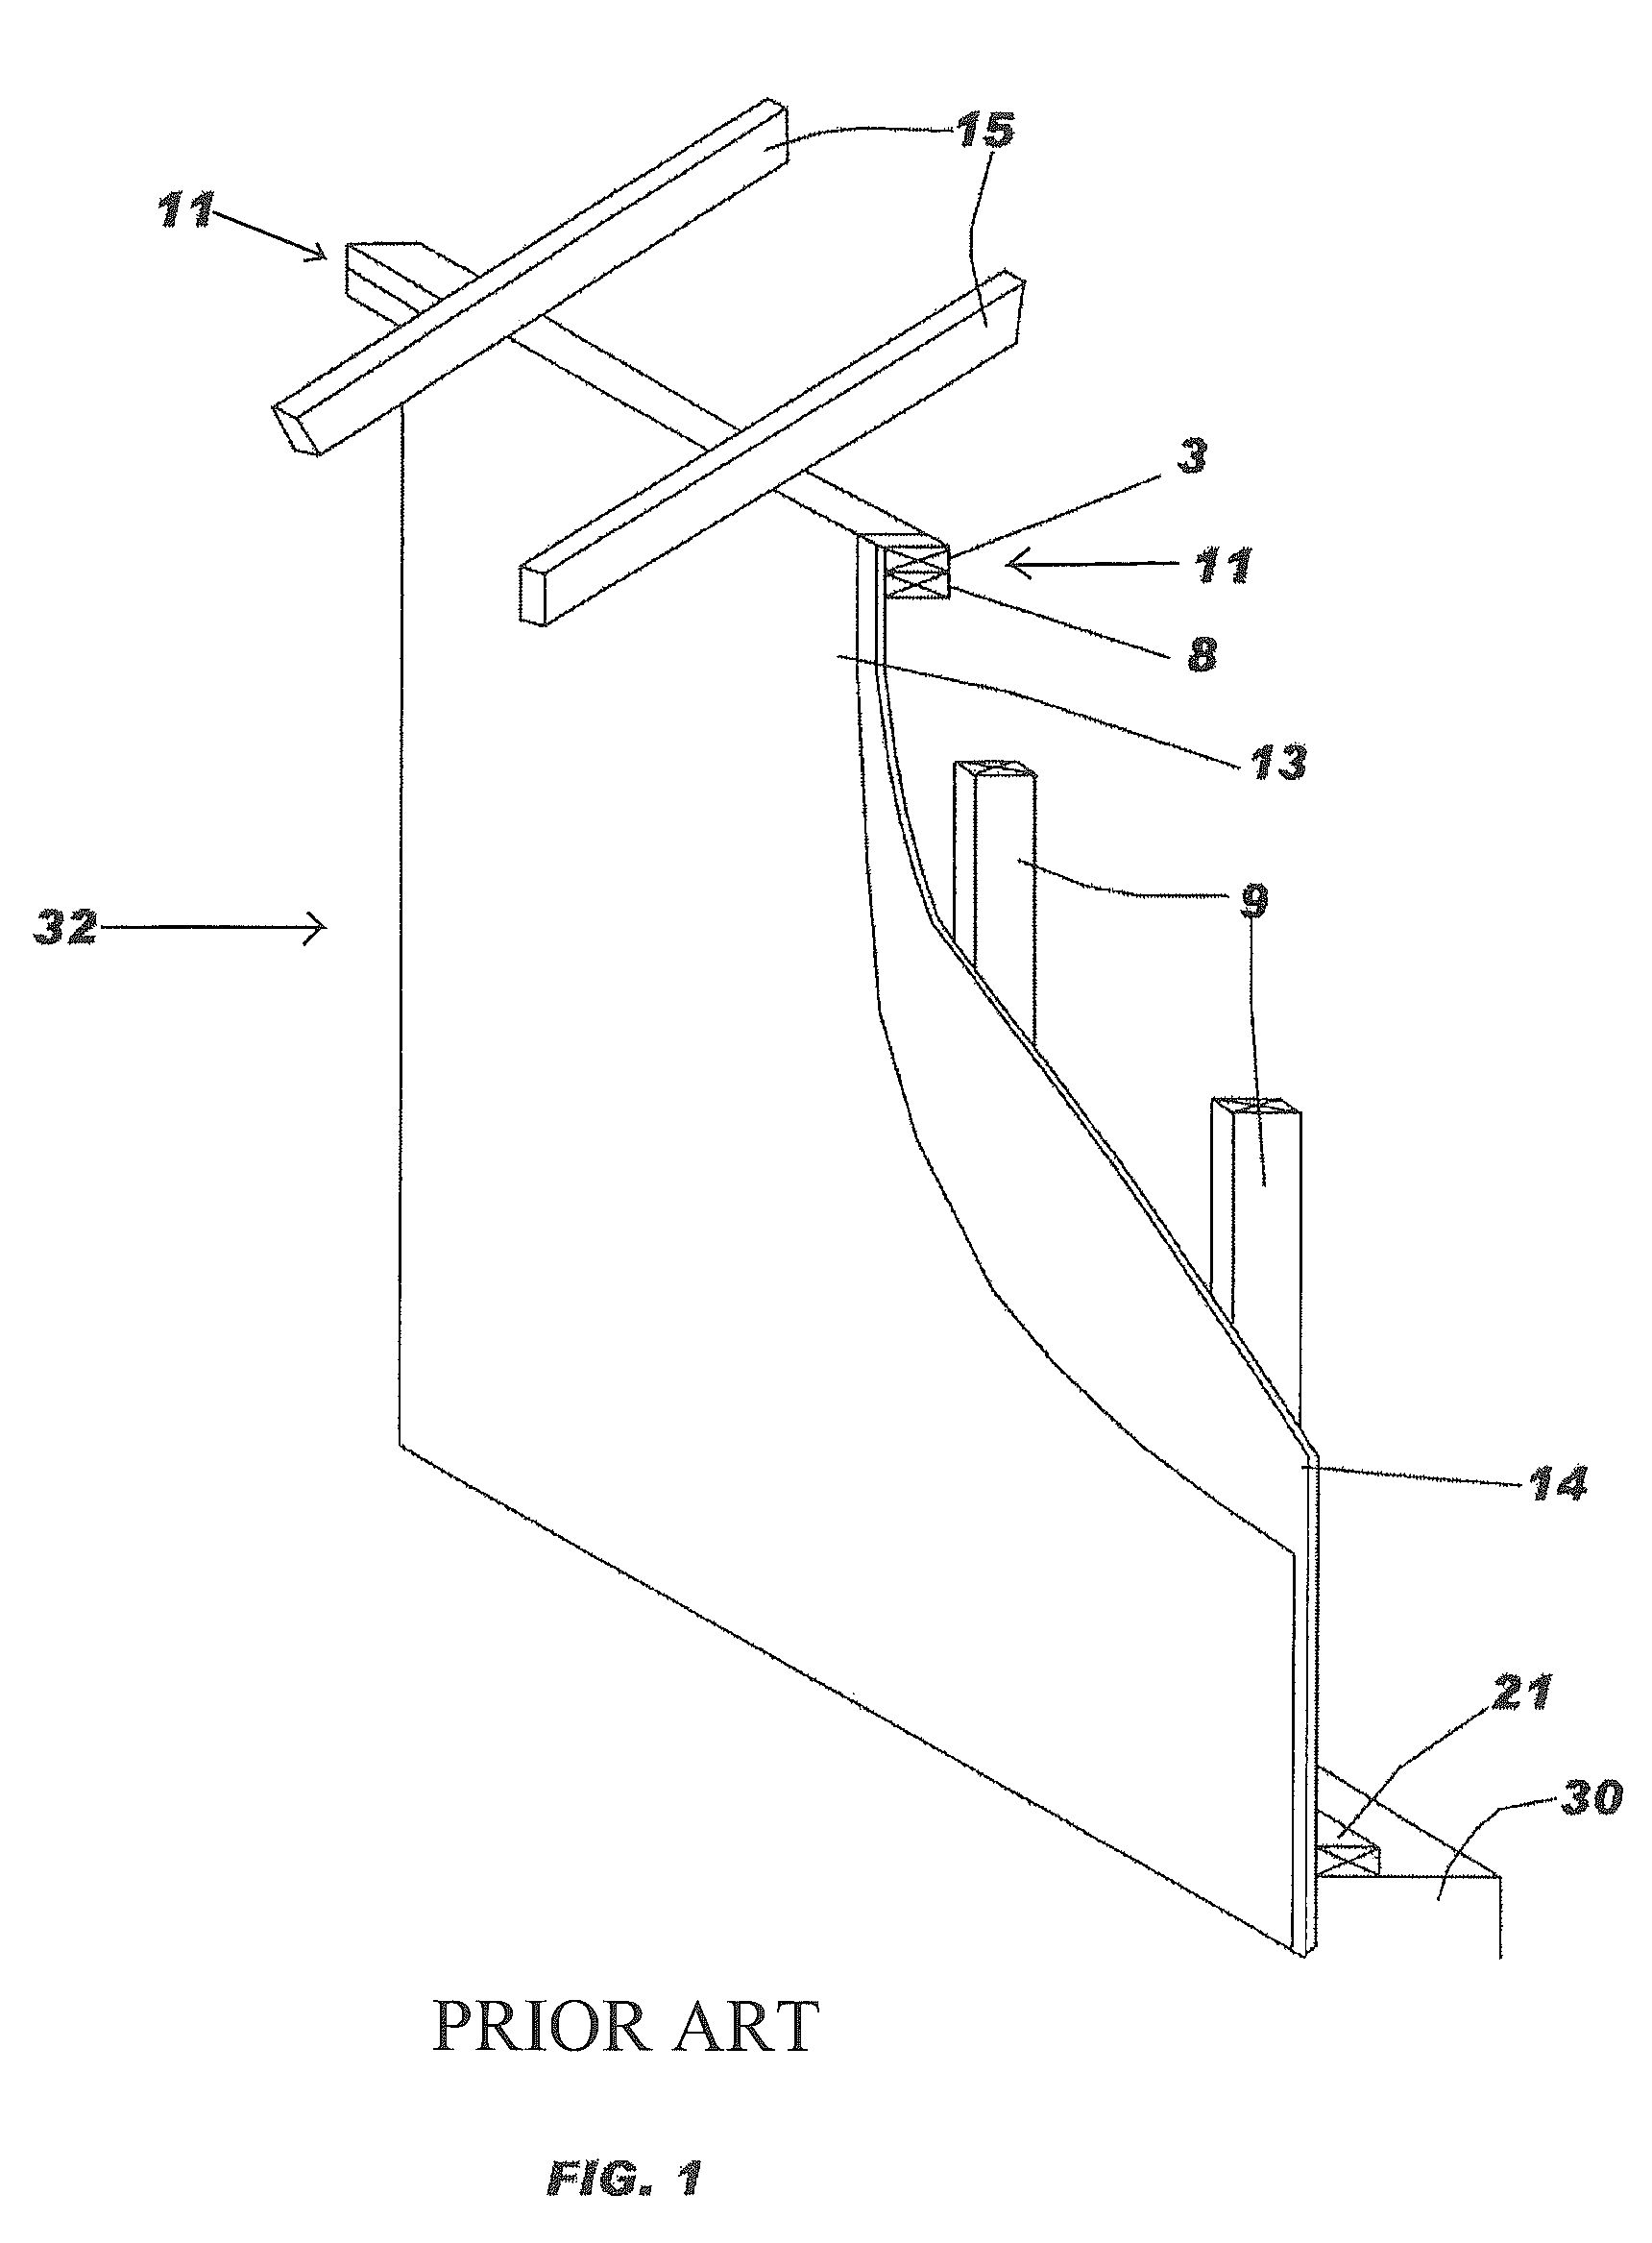 Apparatus for a wind resistant and post load re-tensioning system utilizing a composite fabric and attachment apparatus